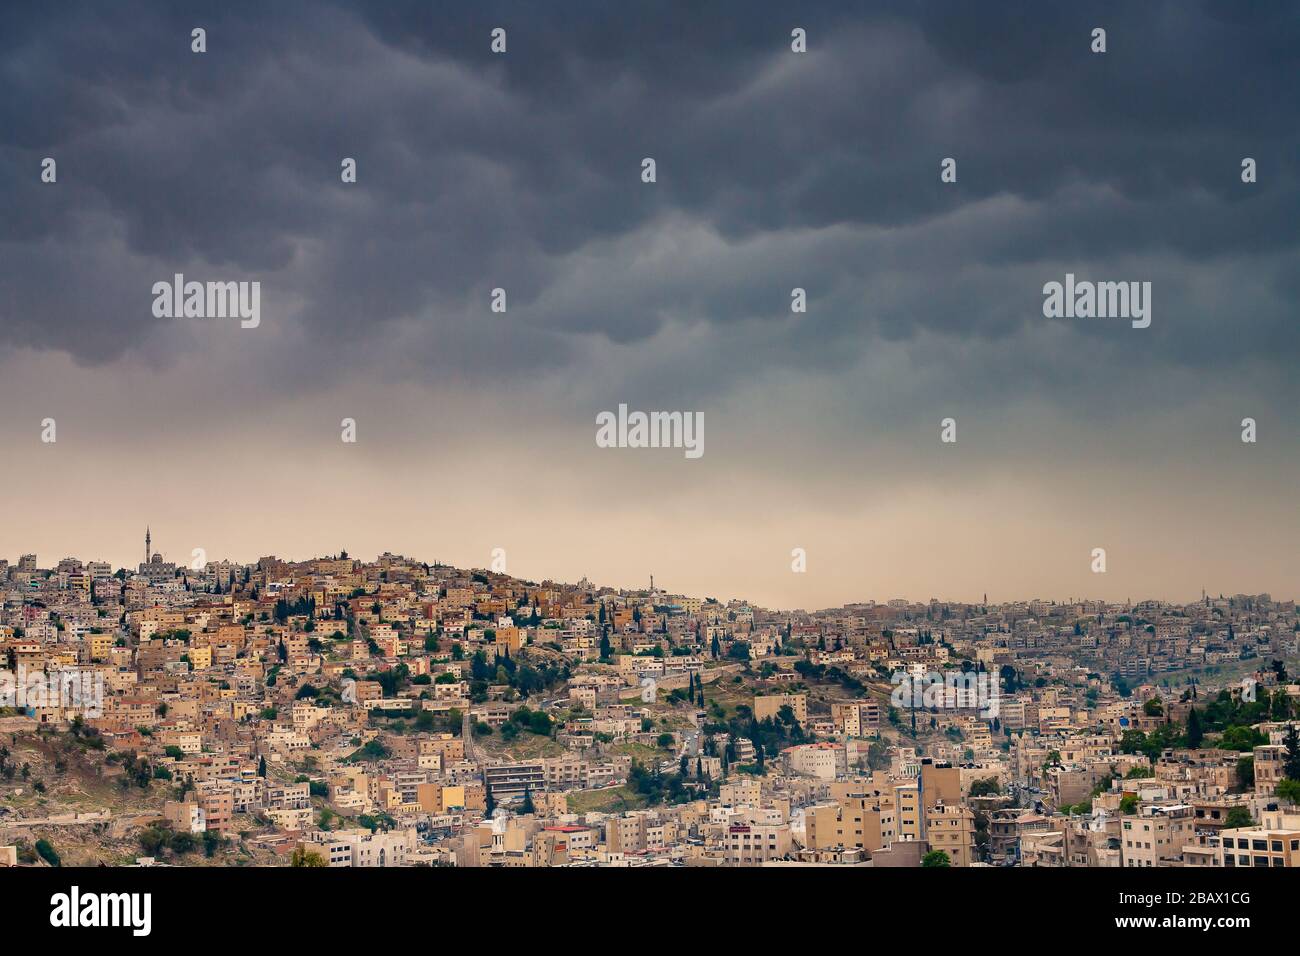 Menacing storm clouds looming over densely populated hills of the old city of Amman, Jordan. Stock Photo